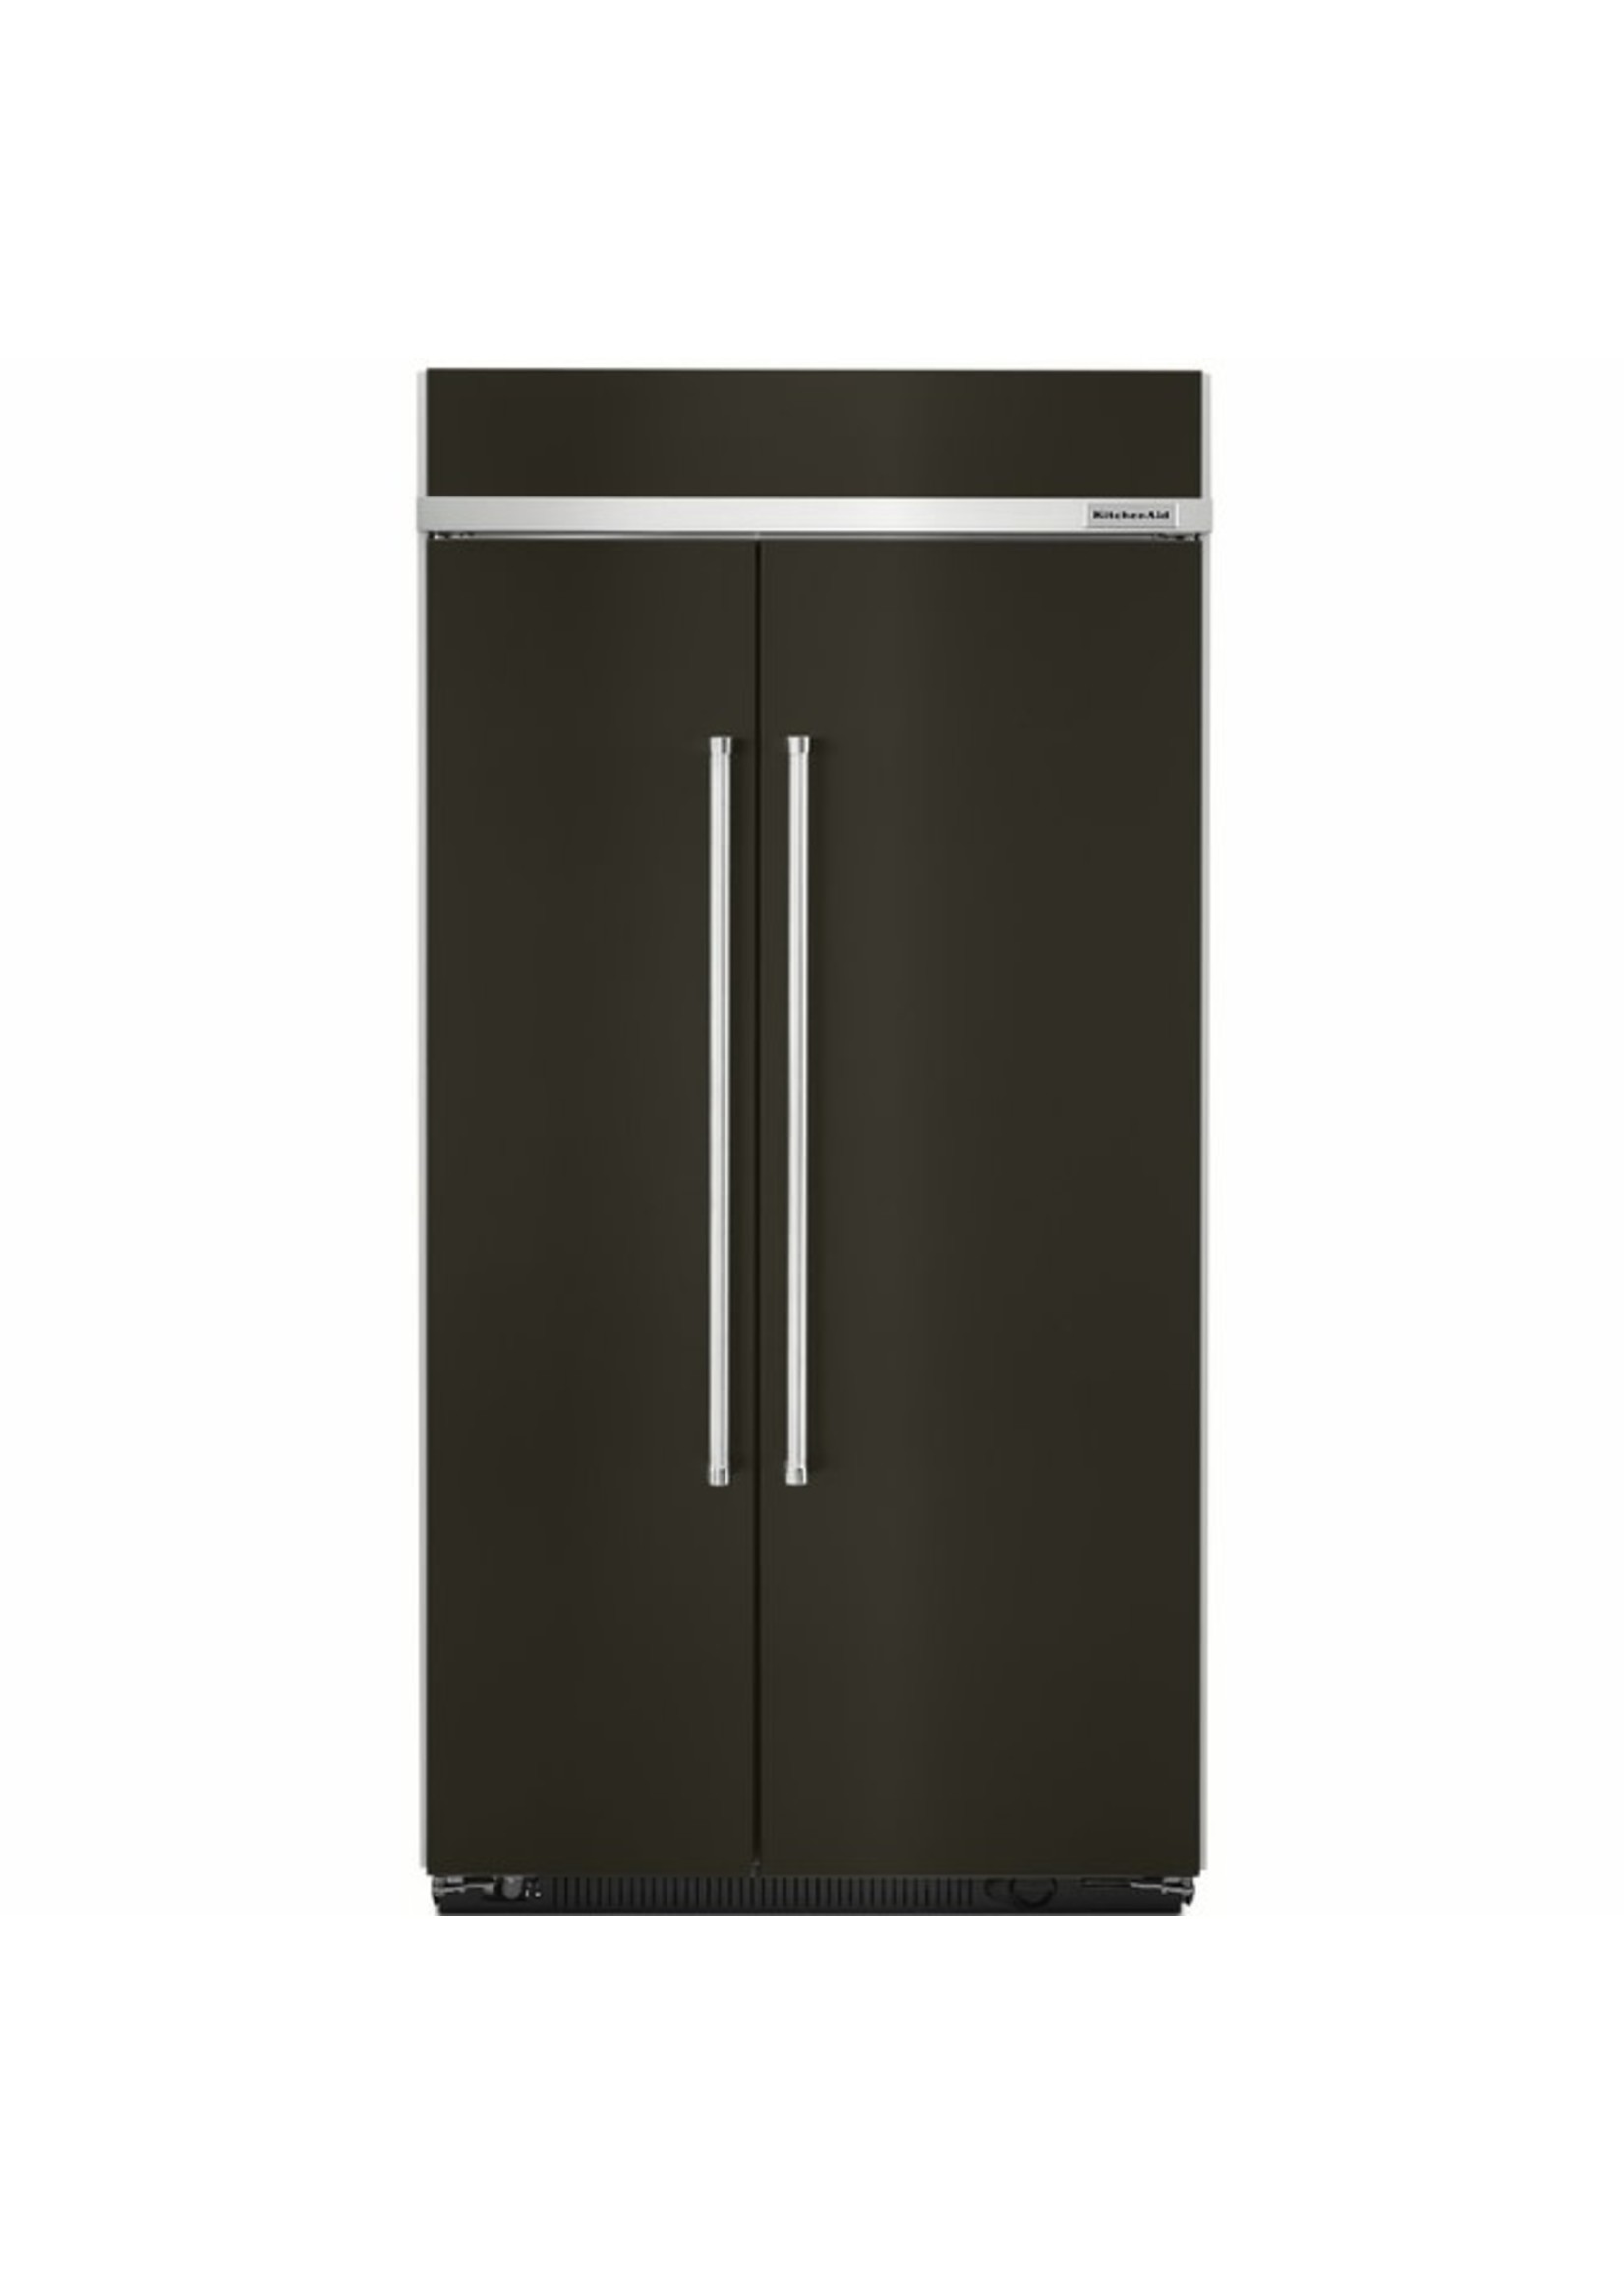 KITCHEN AID KitchenAid ft. 42" 25.5 cu. Built-In Side by Side Refrigerator Black Stainless Steel